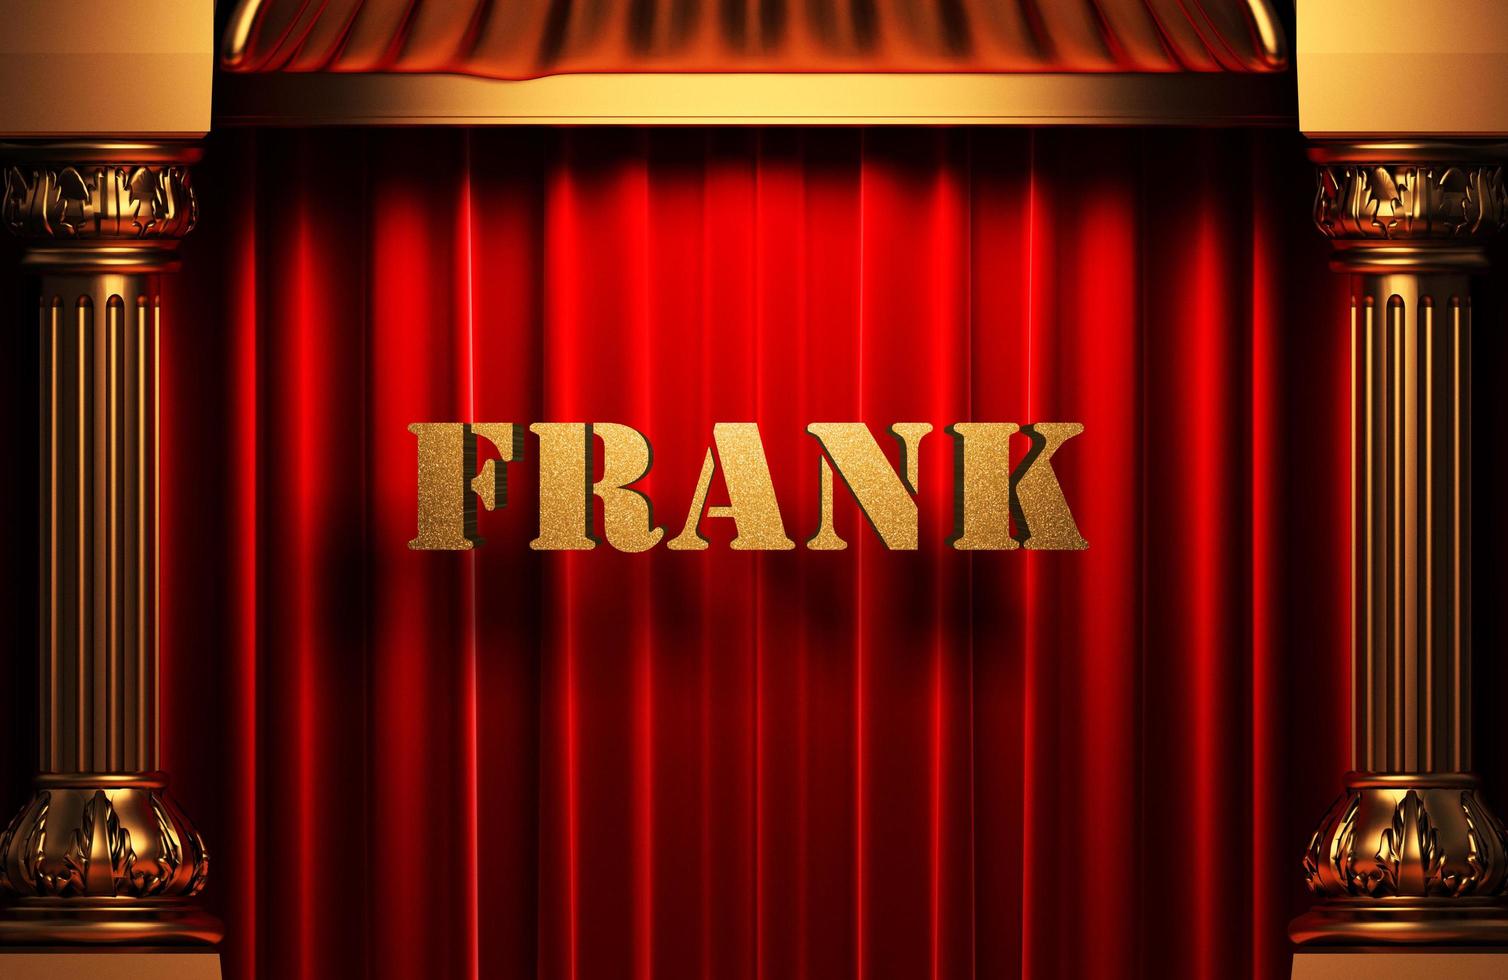 frank golden word on red curtain photo